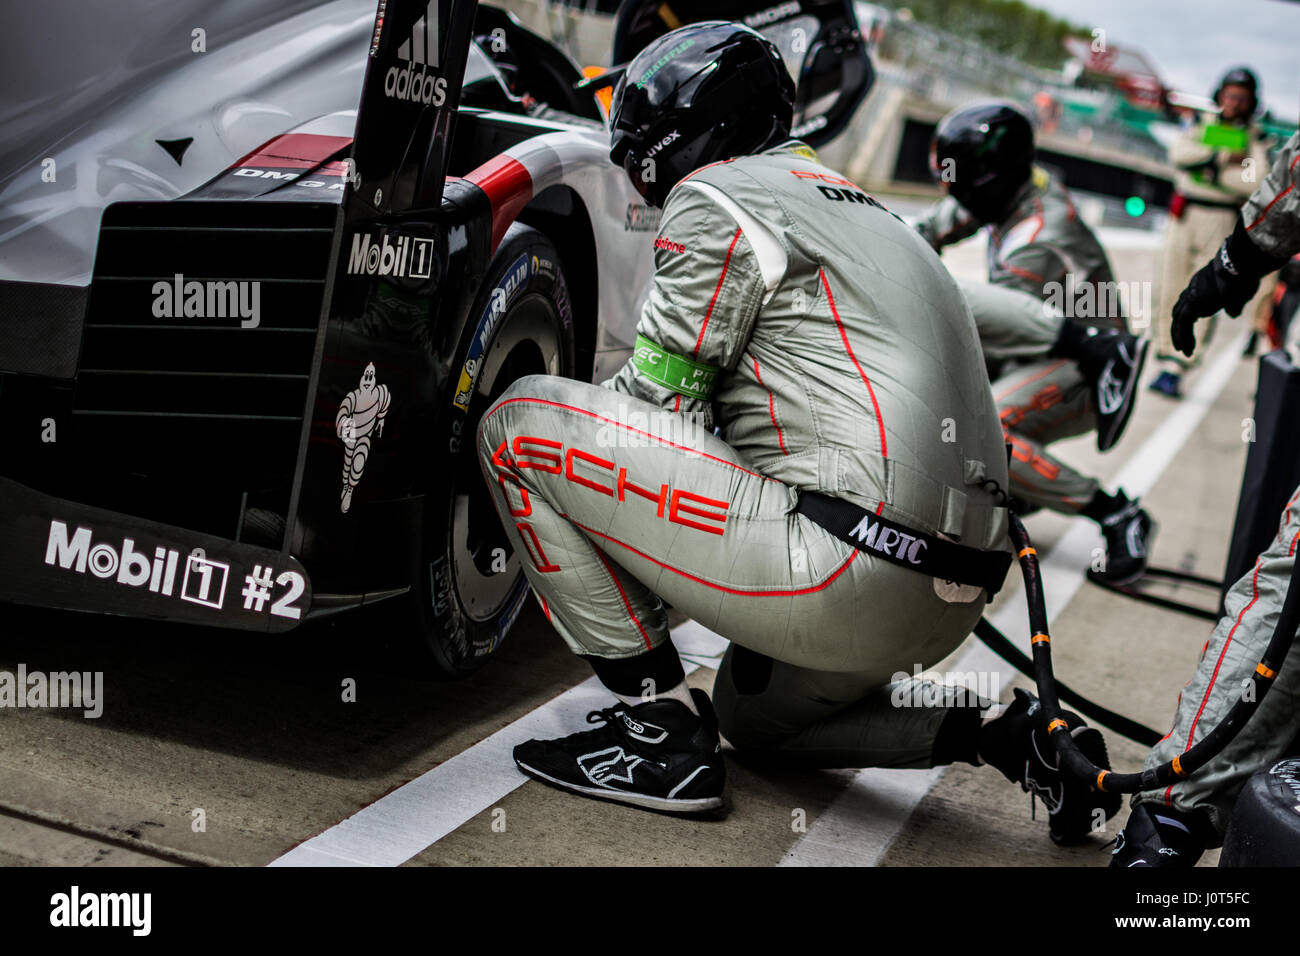 Towcester, Northamptonshire, UK. 16th Apr, 2017. FIA WEC racing team Porsche LMP Team during the 6 Hours of Silverstone of the FIA World Endurance Championship Autograph session at Silverstone Circuit Credit: Gergo Toth/Alamy Live News Stock Photo